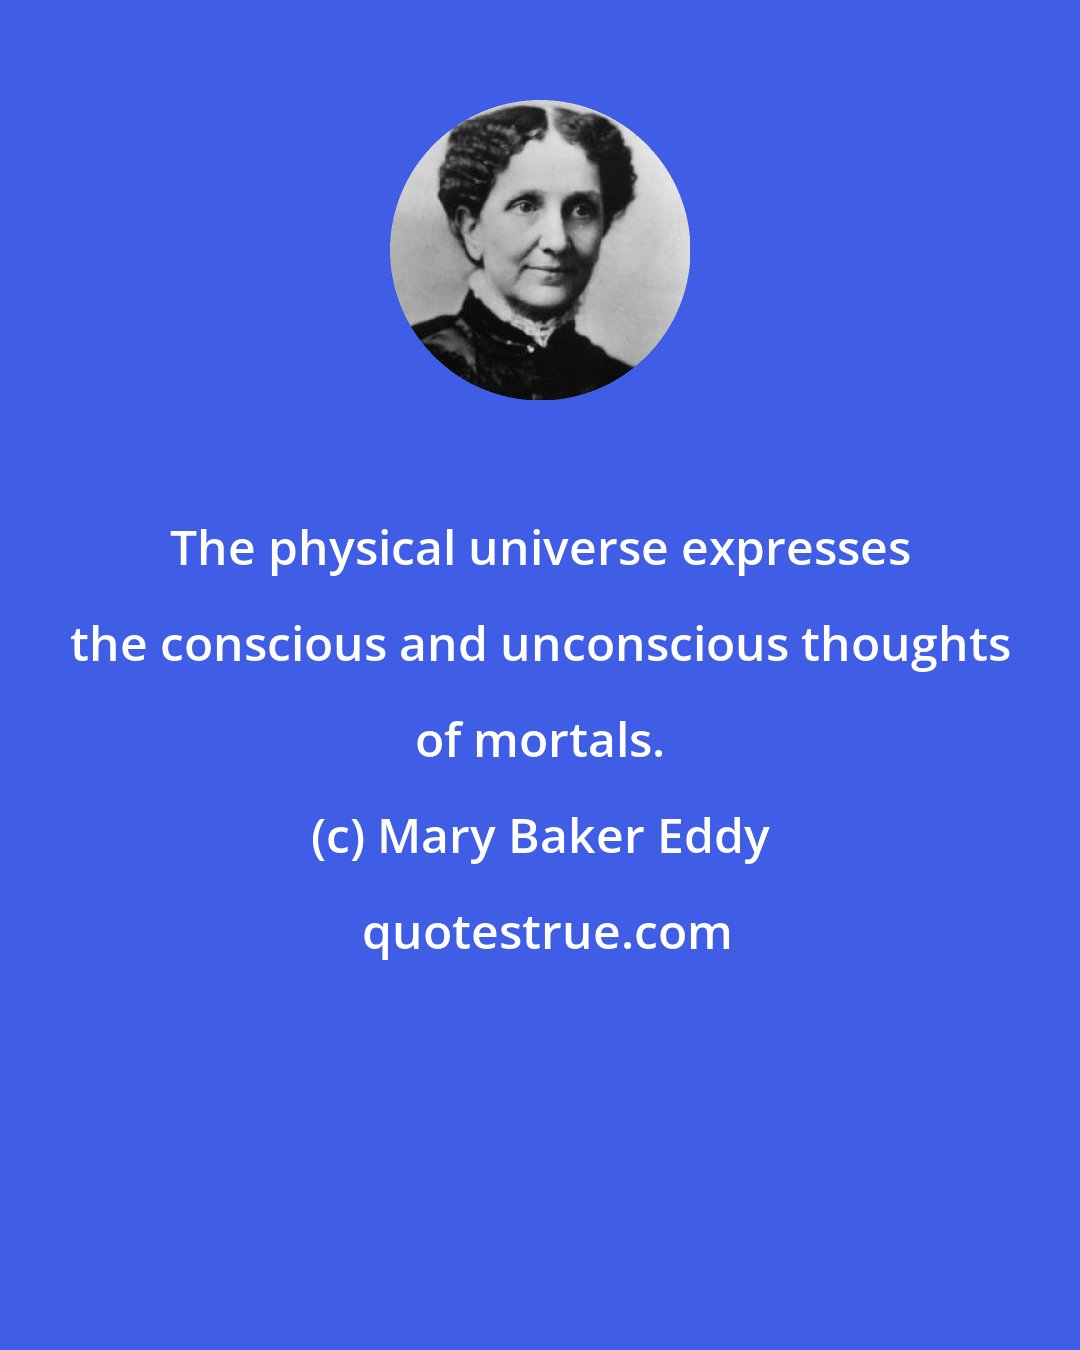 Mary Baker Eddy: The physical universe expresses the conscious and unconscious thoughts of mortals.